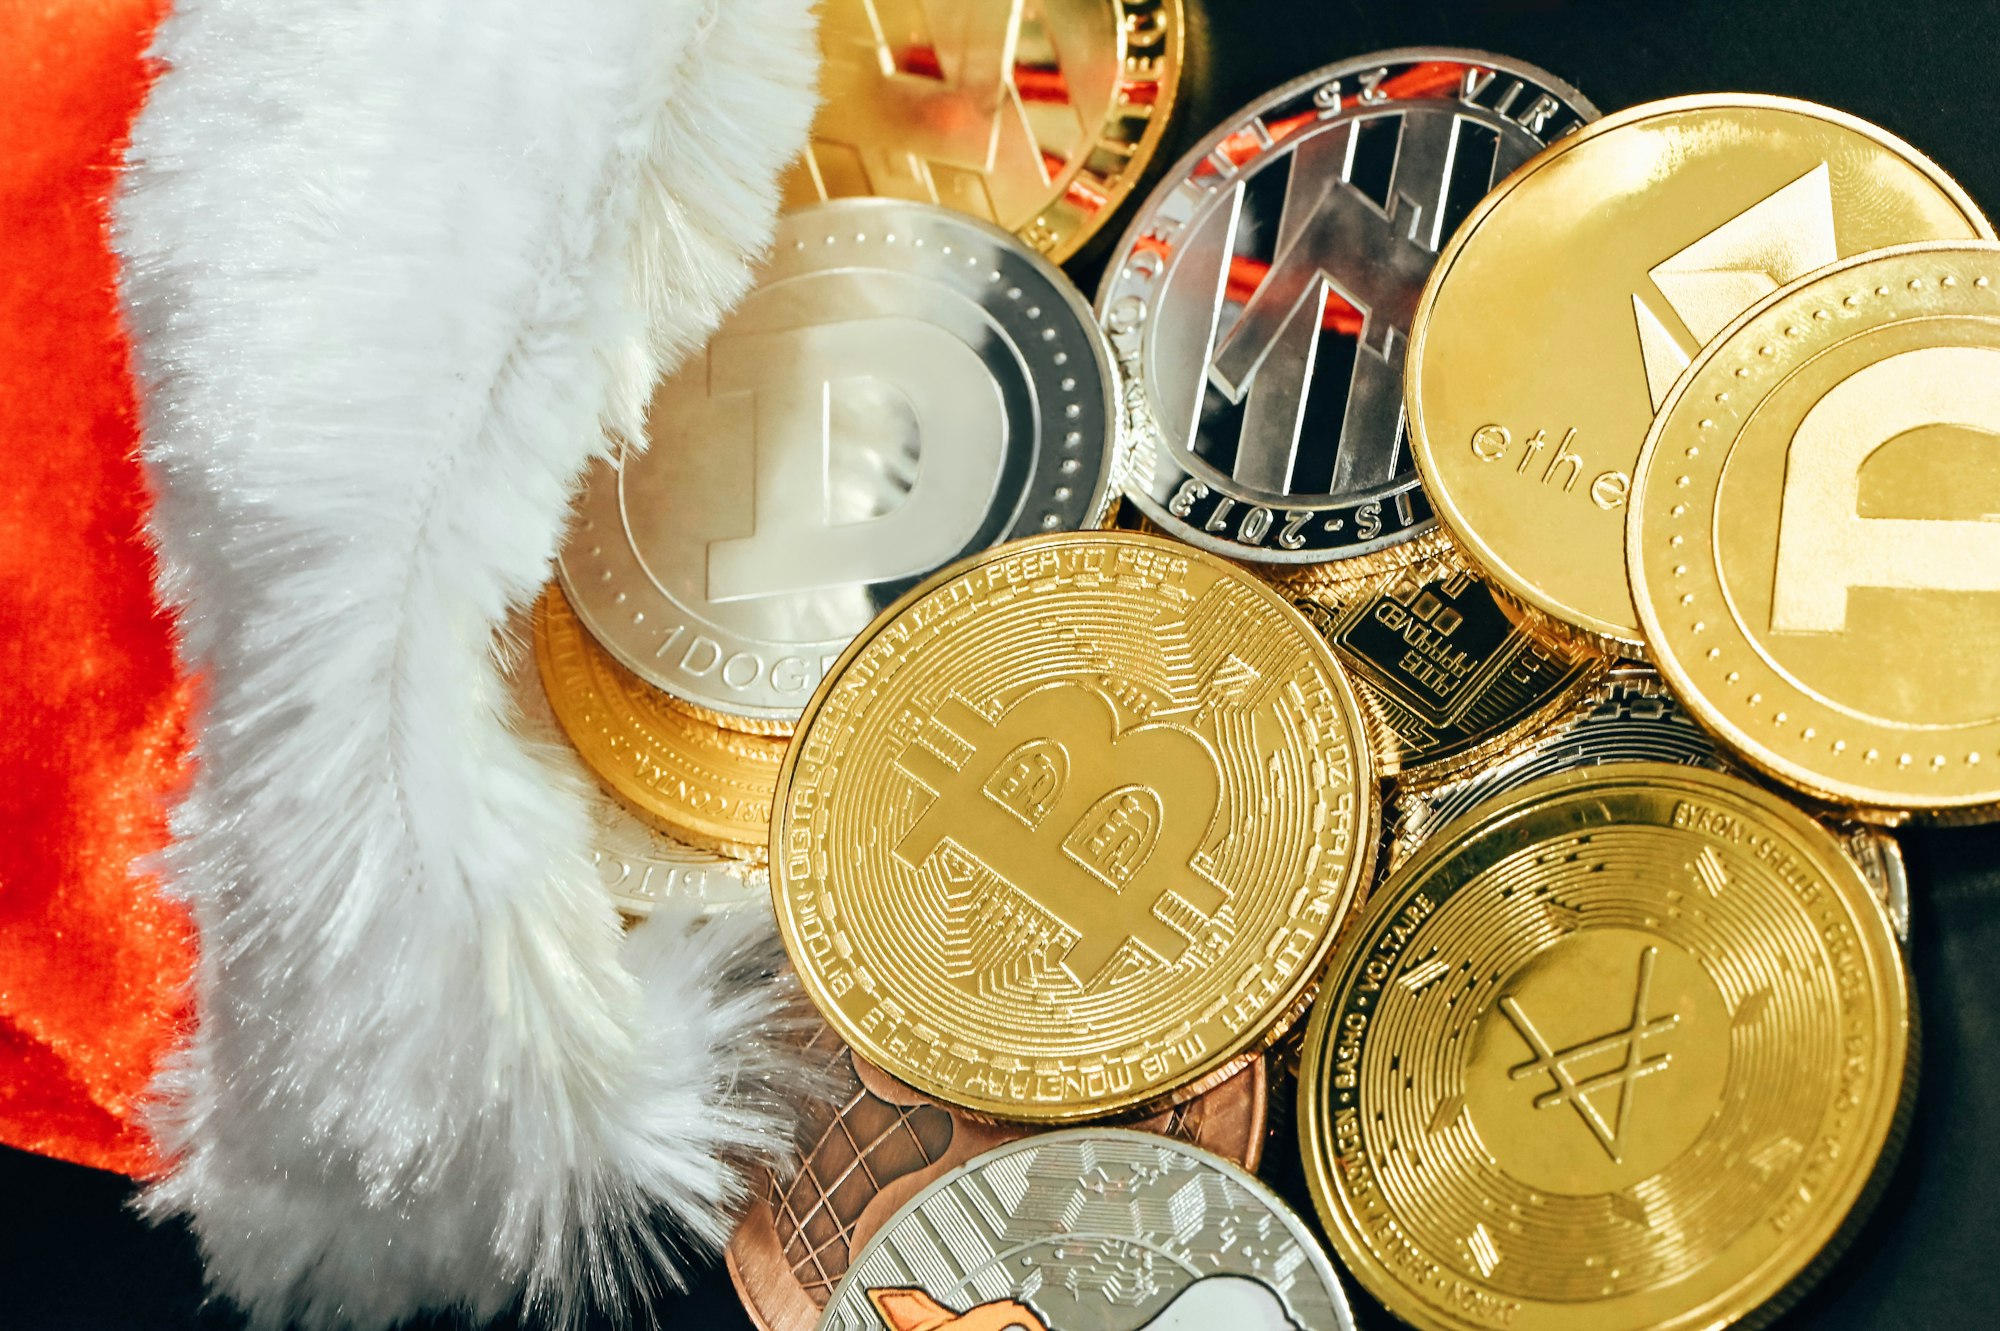 All cryptocurrency coins are hiding in a stocking